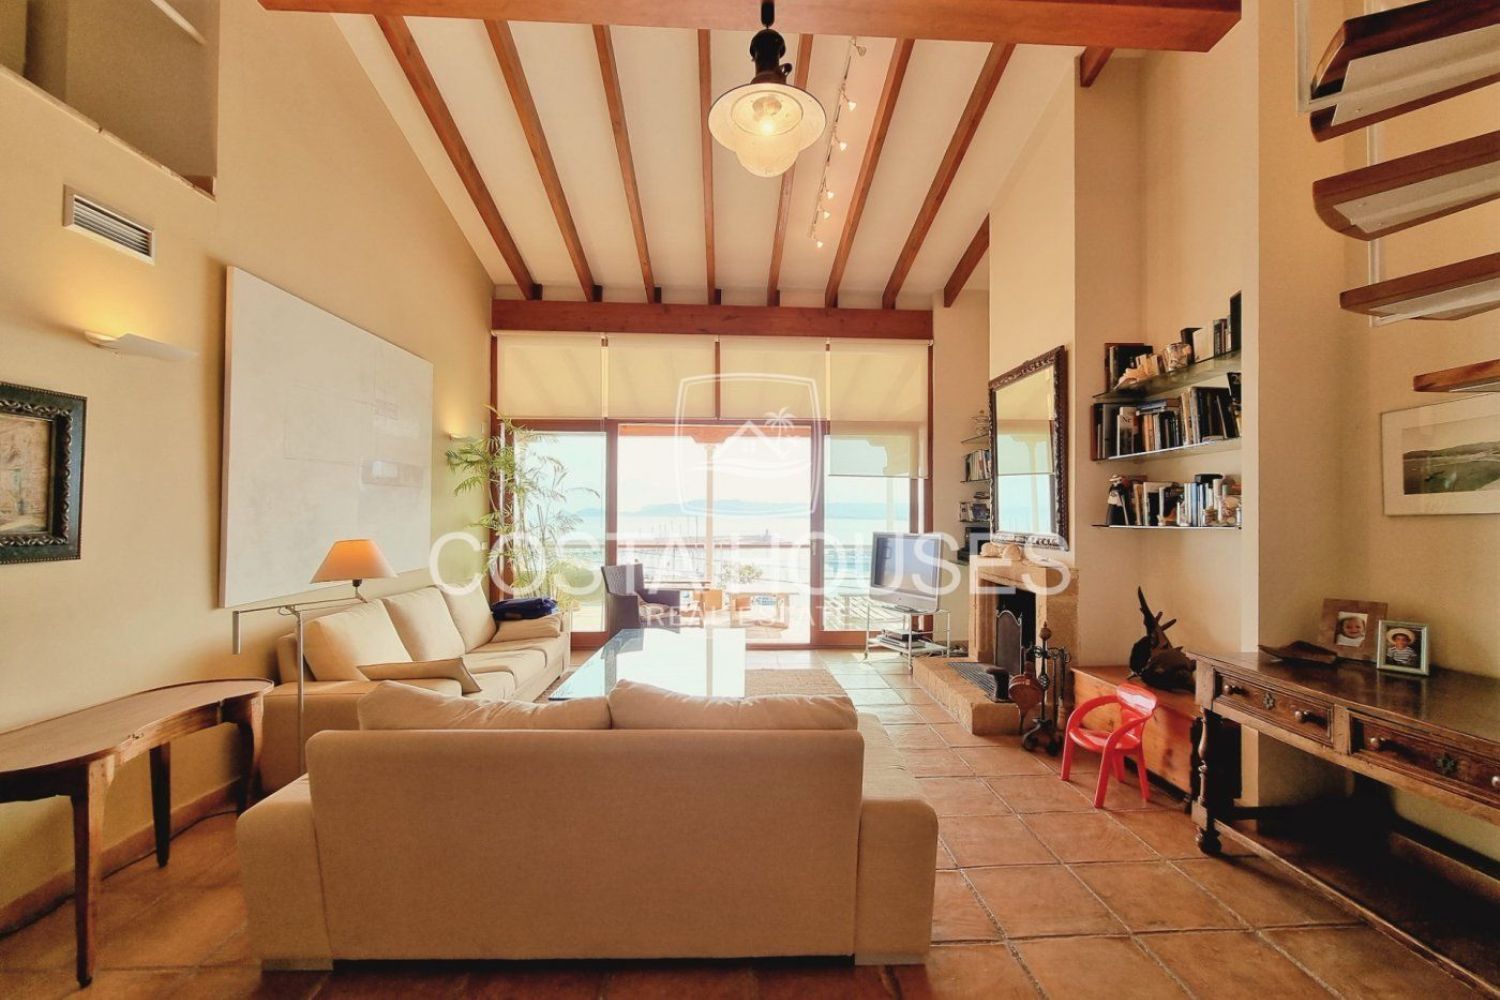 House for sale on the seafront on La Caleta street, in Jávea